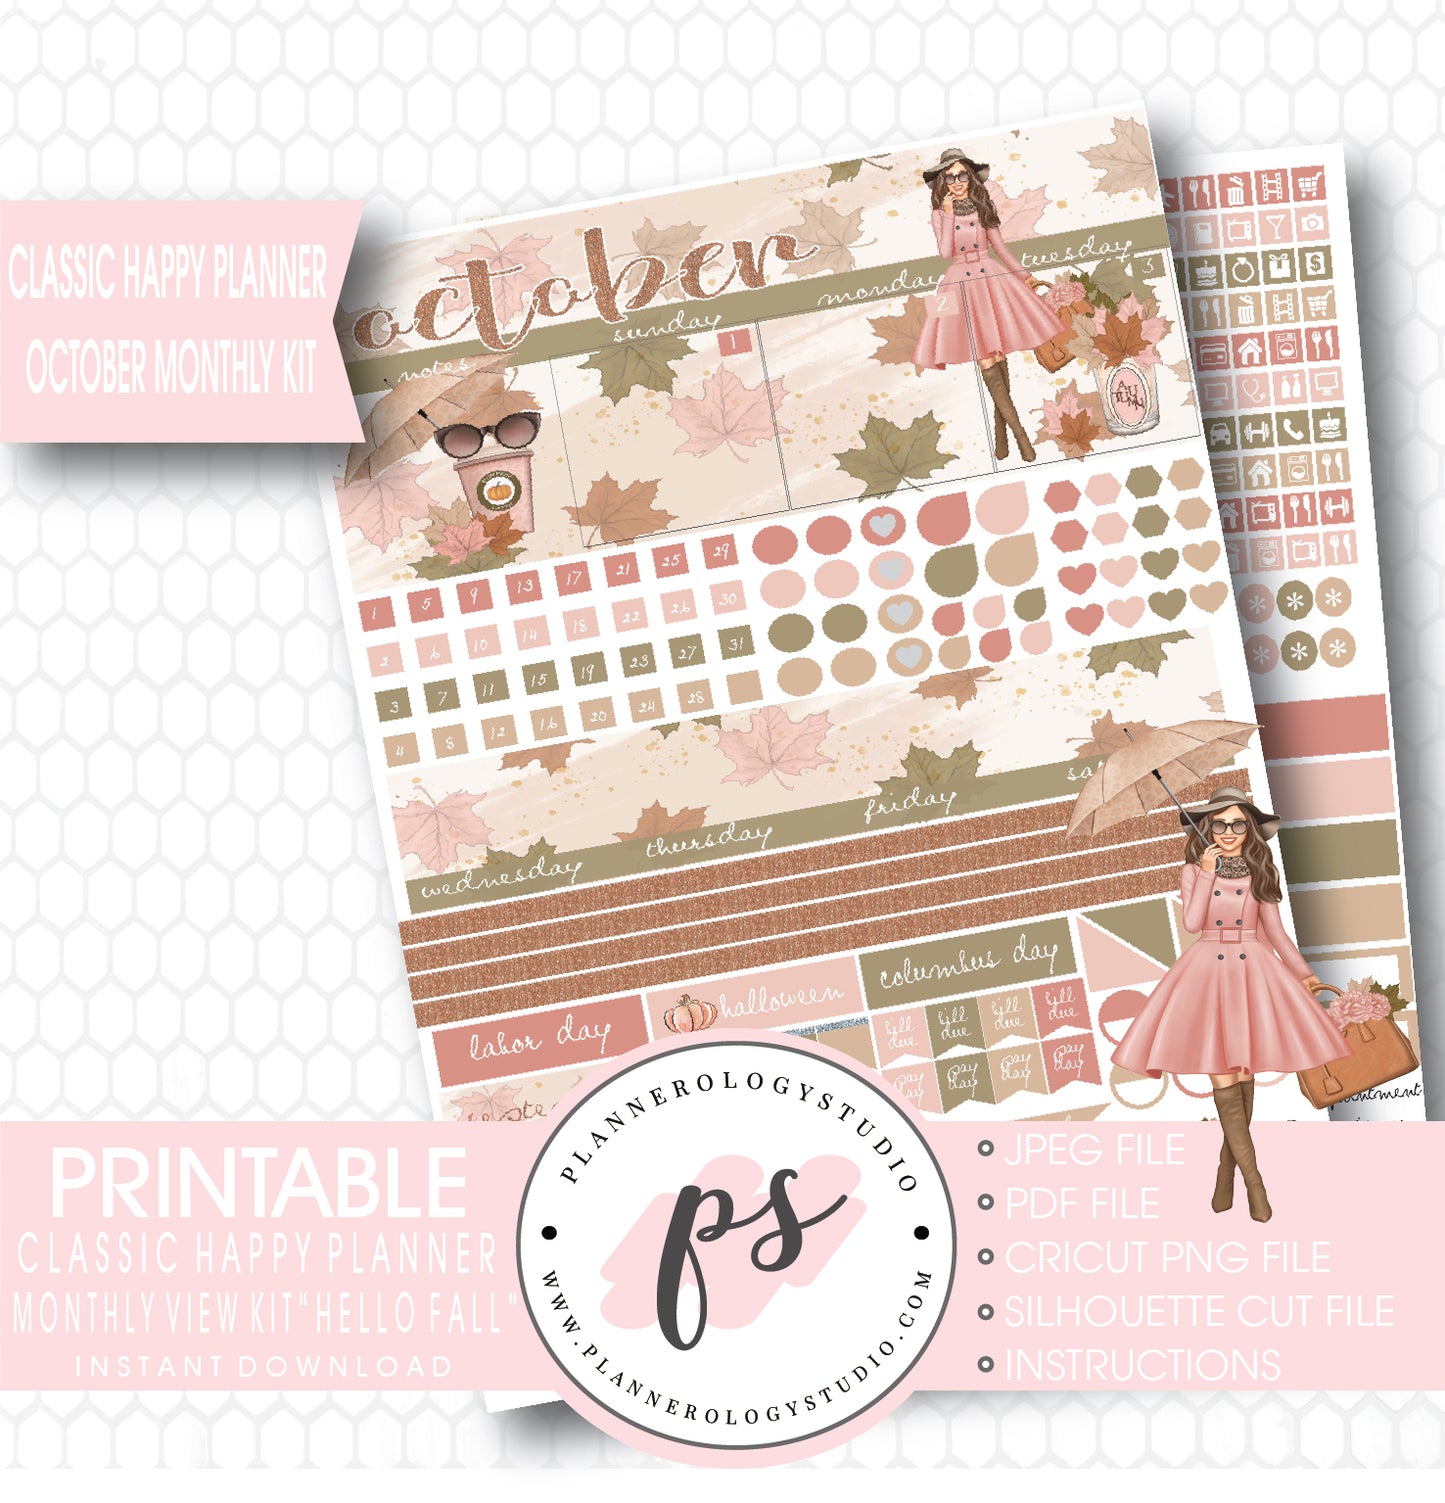 "Hello Fall" October 2017 Monthly View Kit Printable Planner Stickers (for use with Classic Happy Planner) - Plannerologystudio